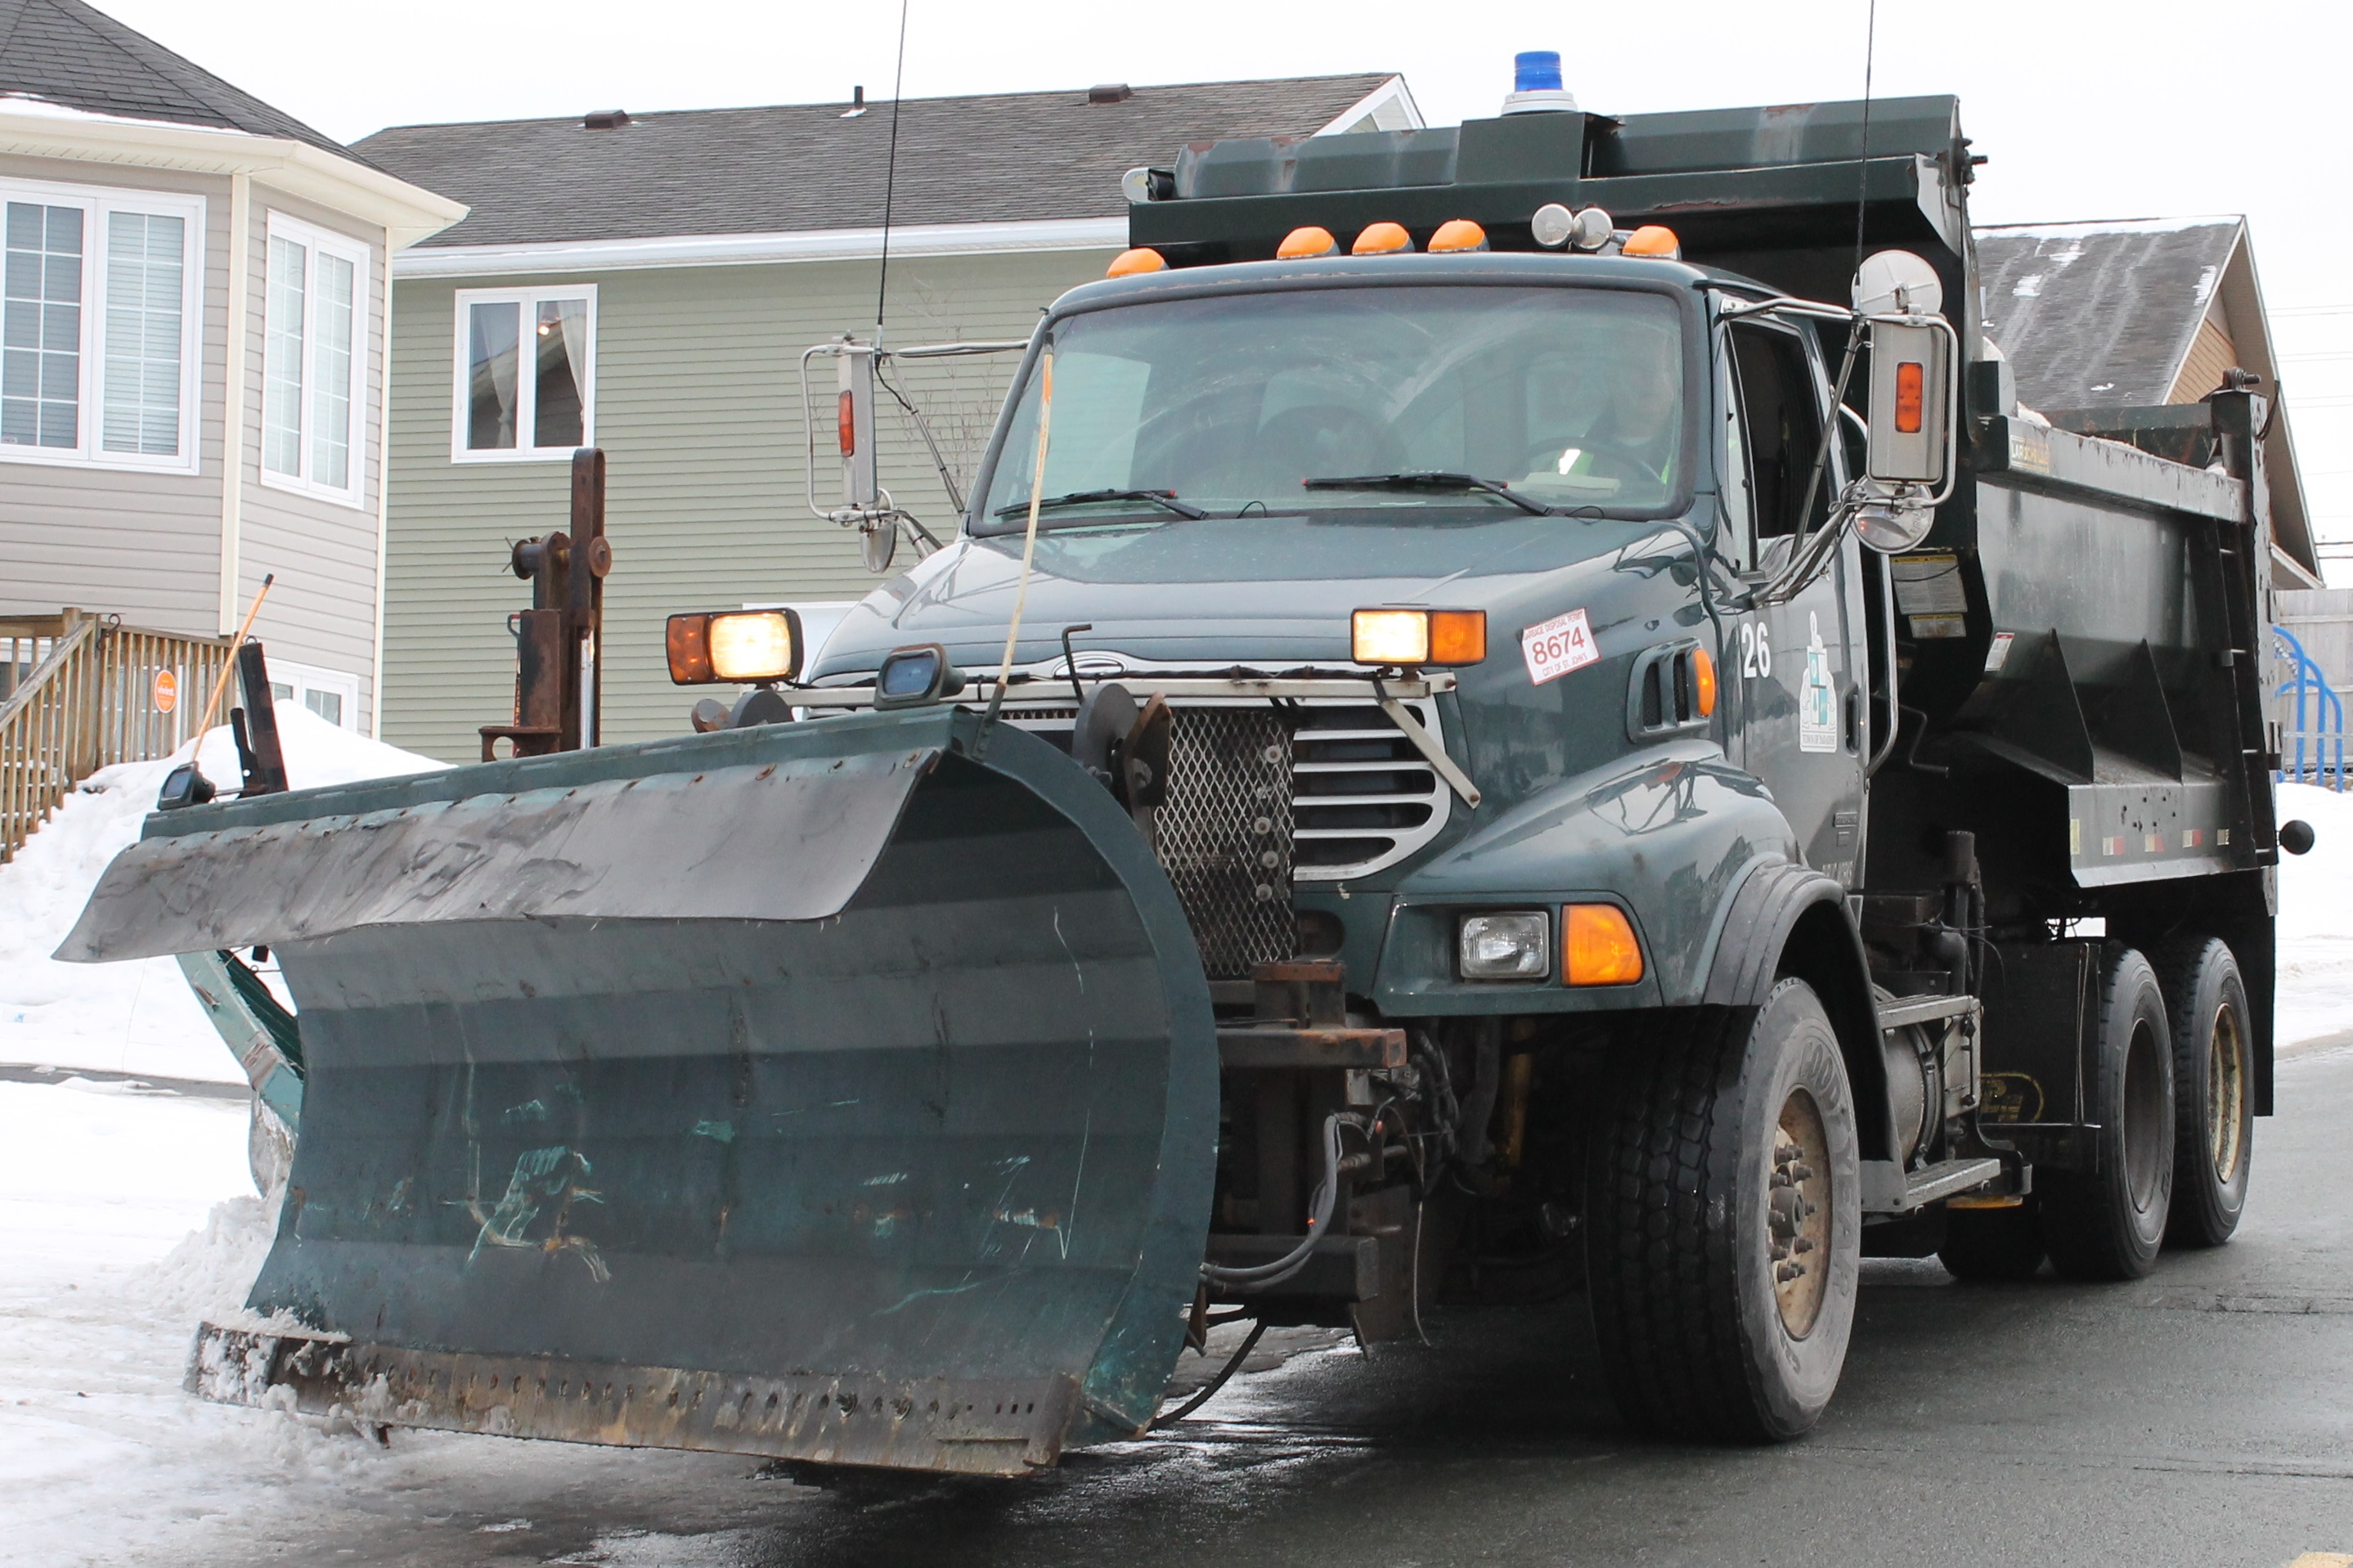 Town of Paradise Snow Clearing Equipment